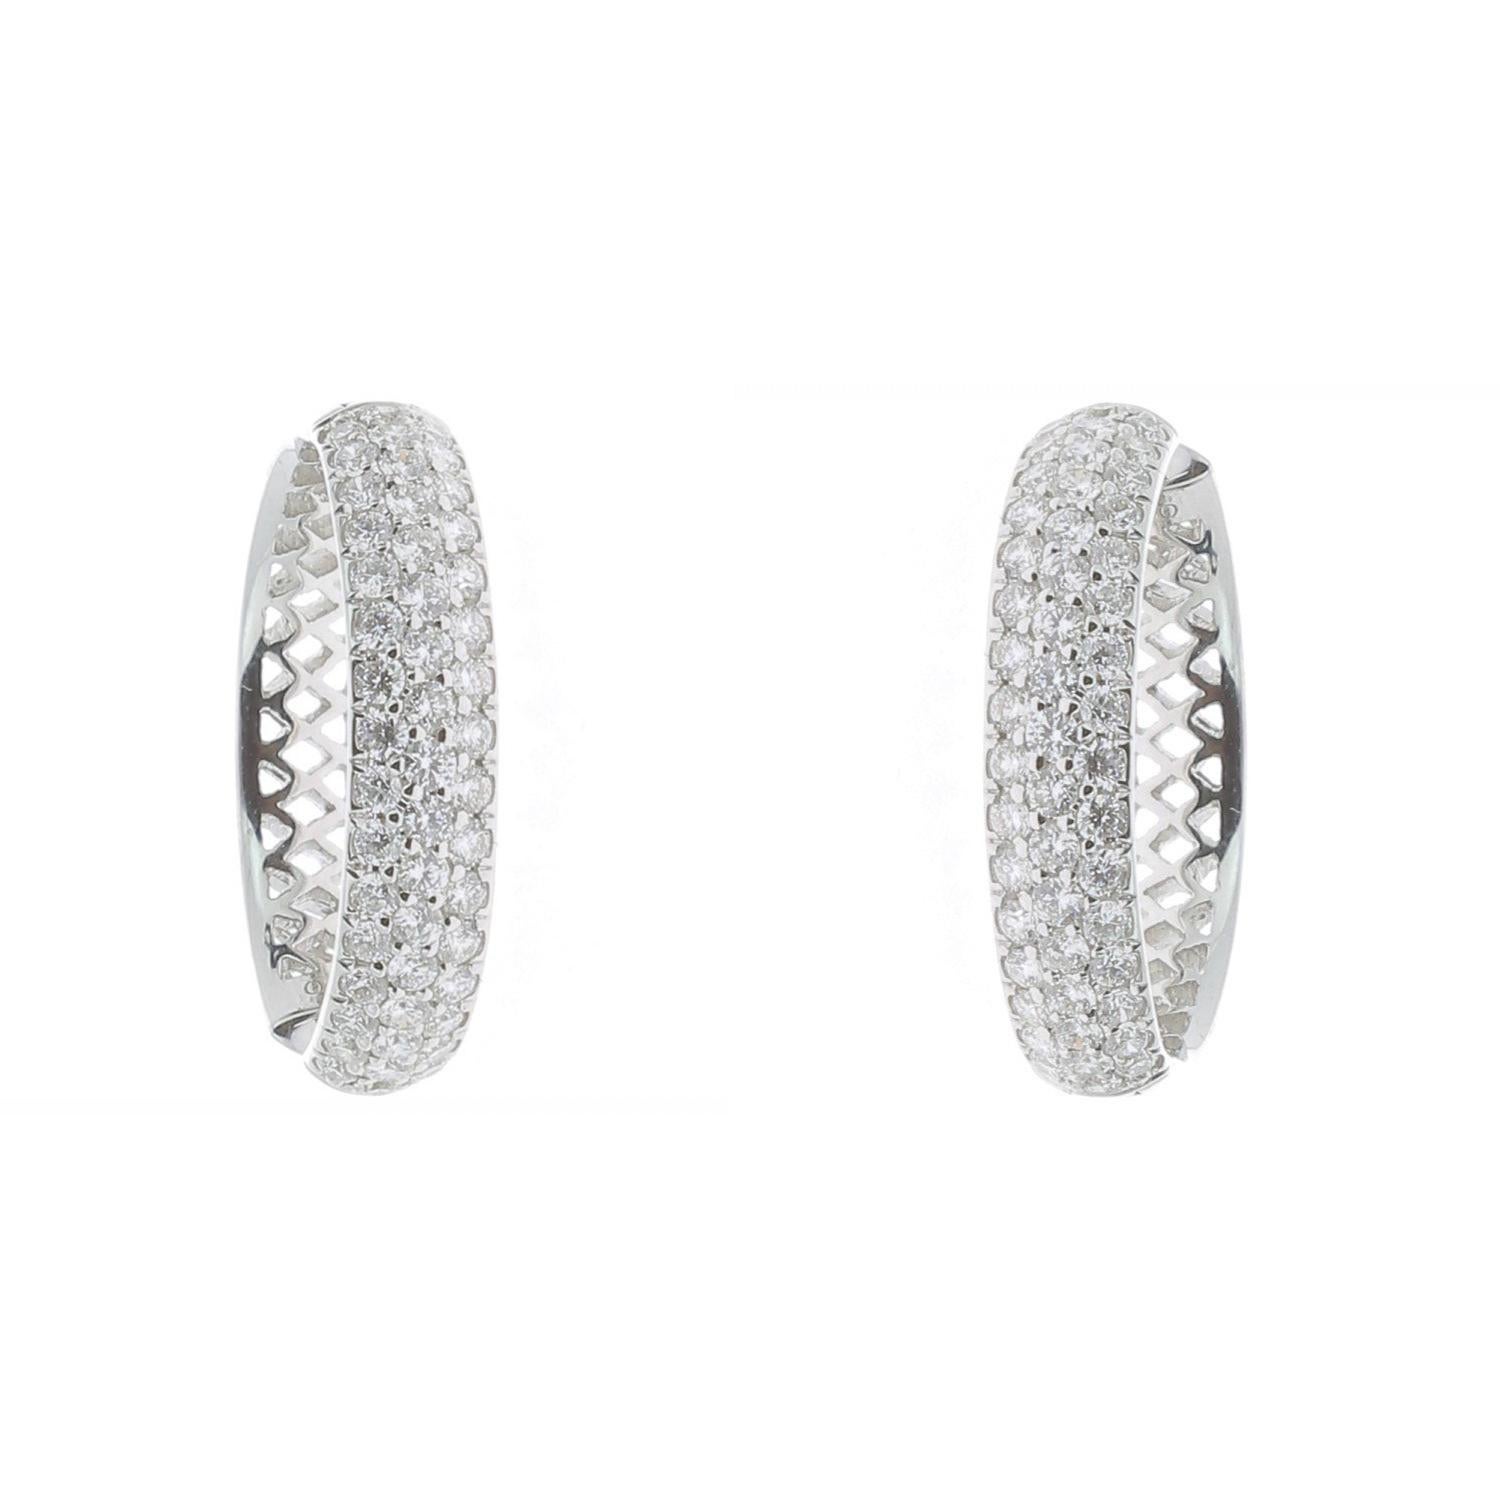 The Diamond hoop earrings are set with 98 round diamonds in three row weighing 1.80 carat. 
The Hoop Diamond Earrings are set in 18K White Gold and weight 7.01 Grams.
The Diamond Hoops Earrings will come in a beautiful box ready for